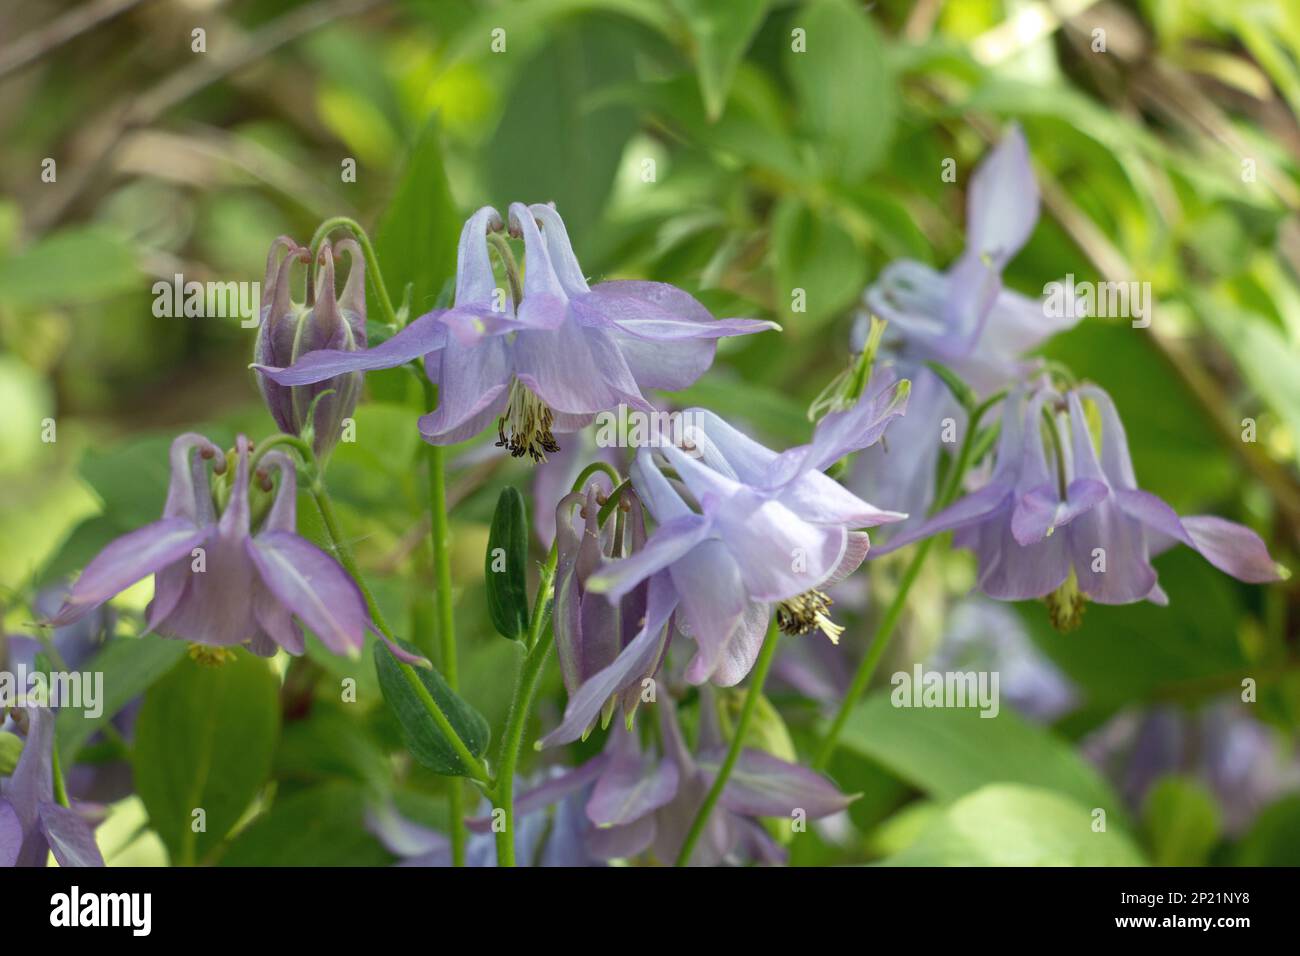 A group of purple lilac Columbine flowers, Aquilegia vulgaris, Granny’s Bonnets with spurred petals, blooming in summer, natural green background Stock Photo